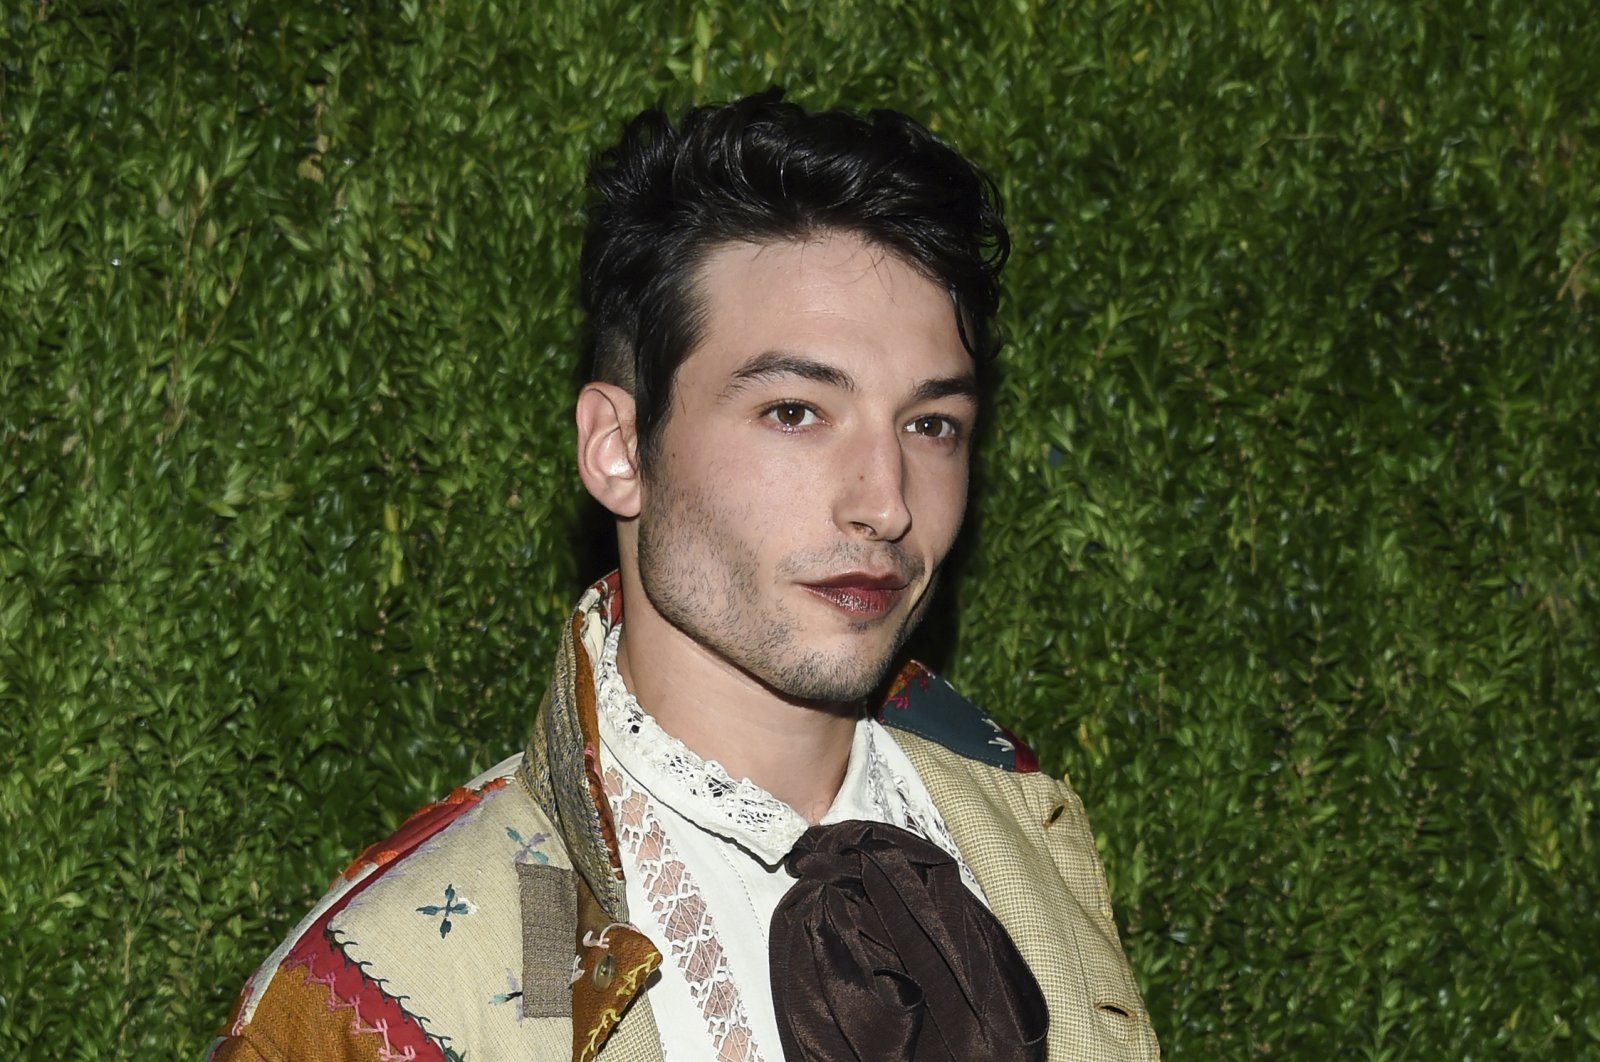 Ezra Miller attends the 15th annual CFDA/Vogue Fashion Fund event at the Brooklyn Navy Yard in New York, U.S., Nov. 5, 2018. (AP Photo)